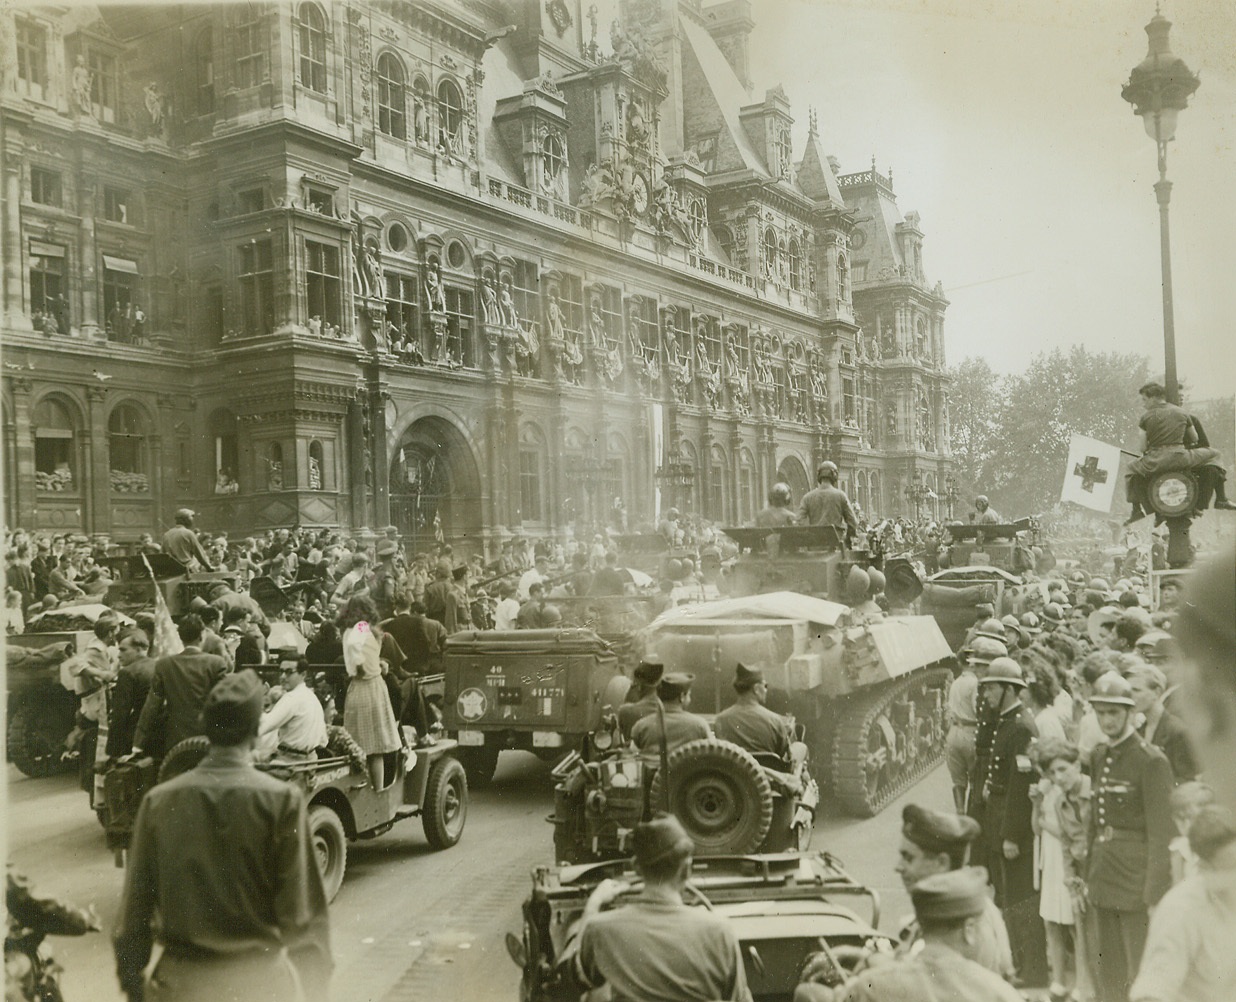 Stage Set For Panic, 8/28/1944. Paris—This was the scene in the Place de L’Hotel de Ville before snipers sent a panic-stricken crowd scurrying for their lives during the official reception for General Charles de Gaulle. The street is jammed with Allied armored vehicles and hundreds of celebrating Parisians. At left, spectators jam the windows of the Hotel de Ville, while at right one spectator has climbed to a perch halfway up a lamp post to witness the celebration.  Credit: ACME photo by Andy Lopez for the War Picture Pool;